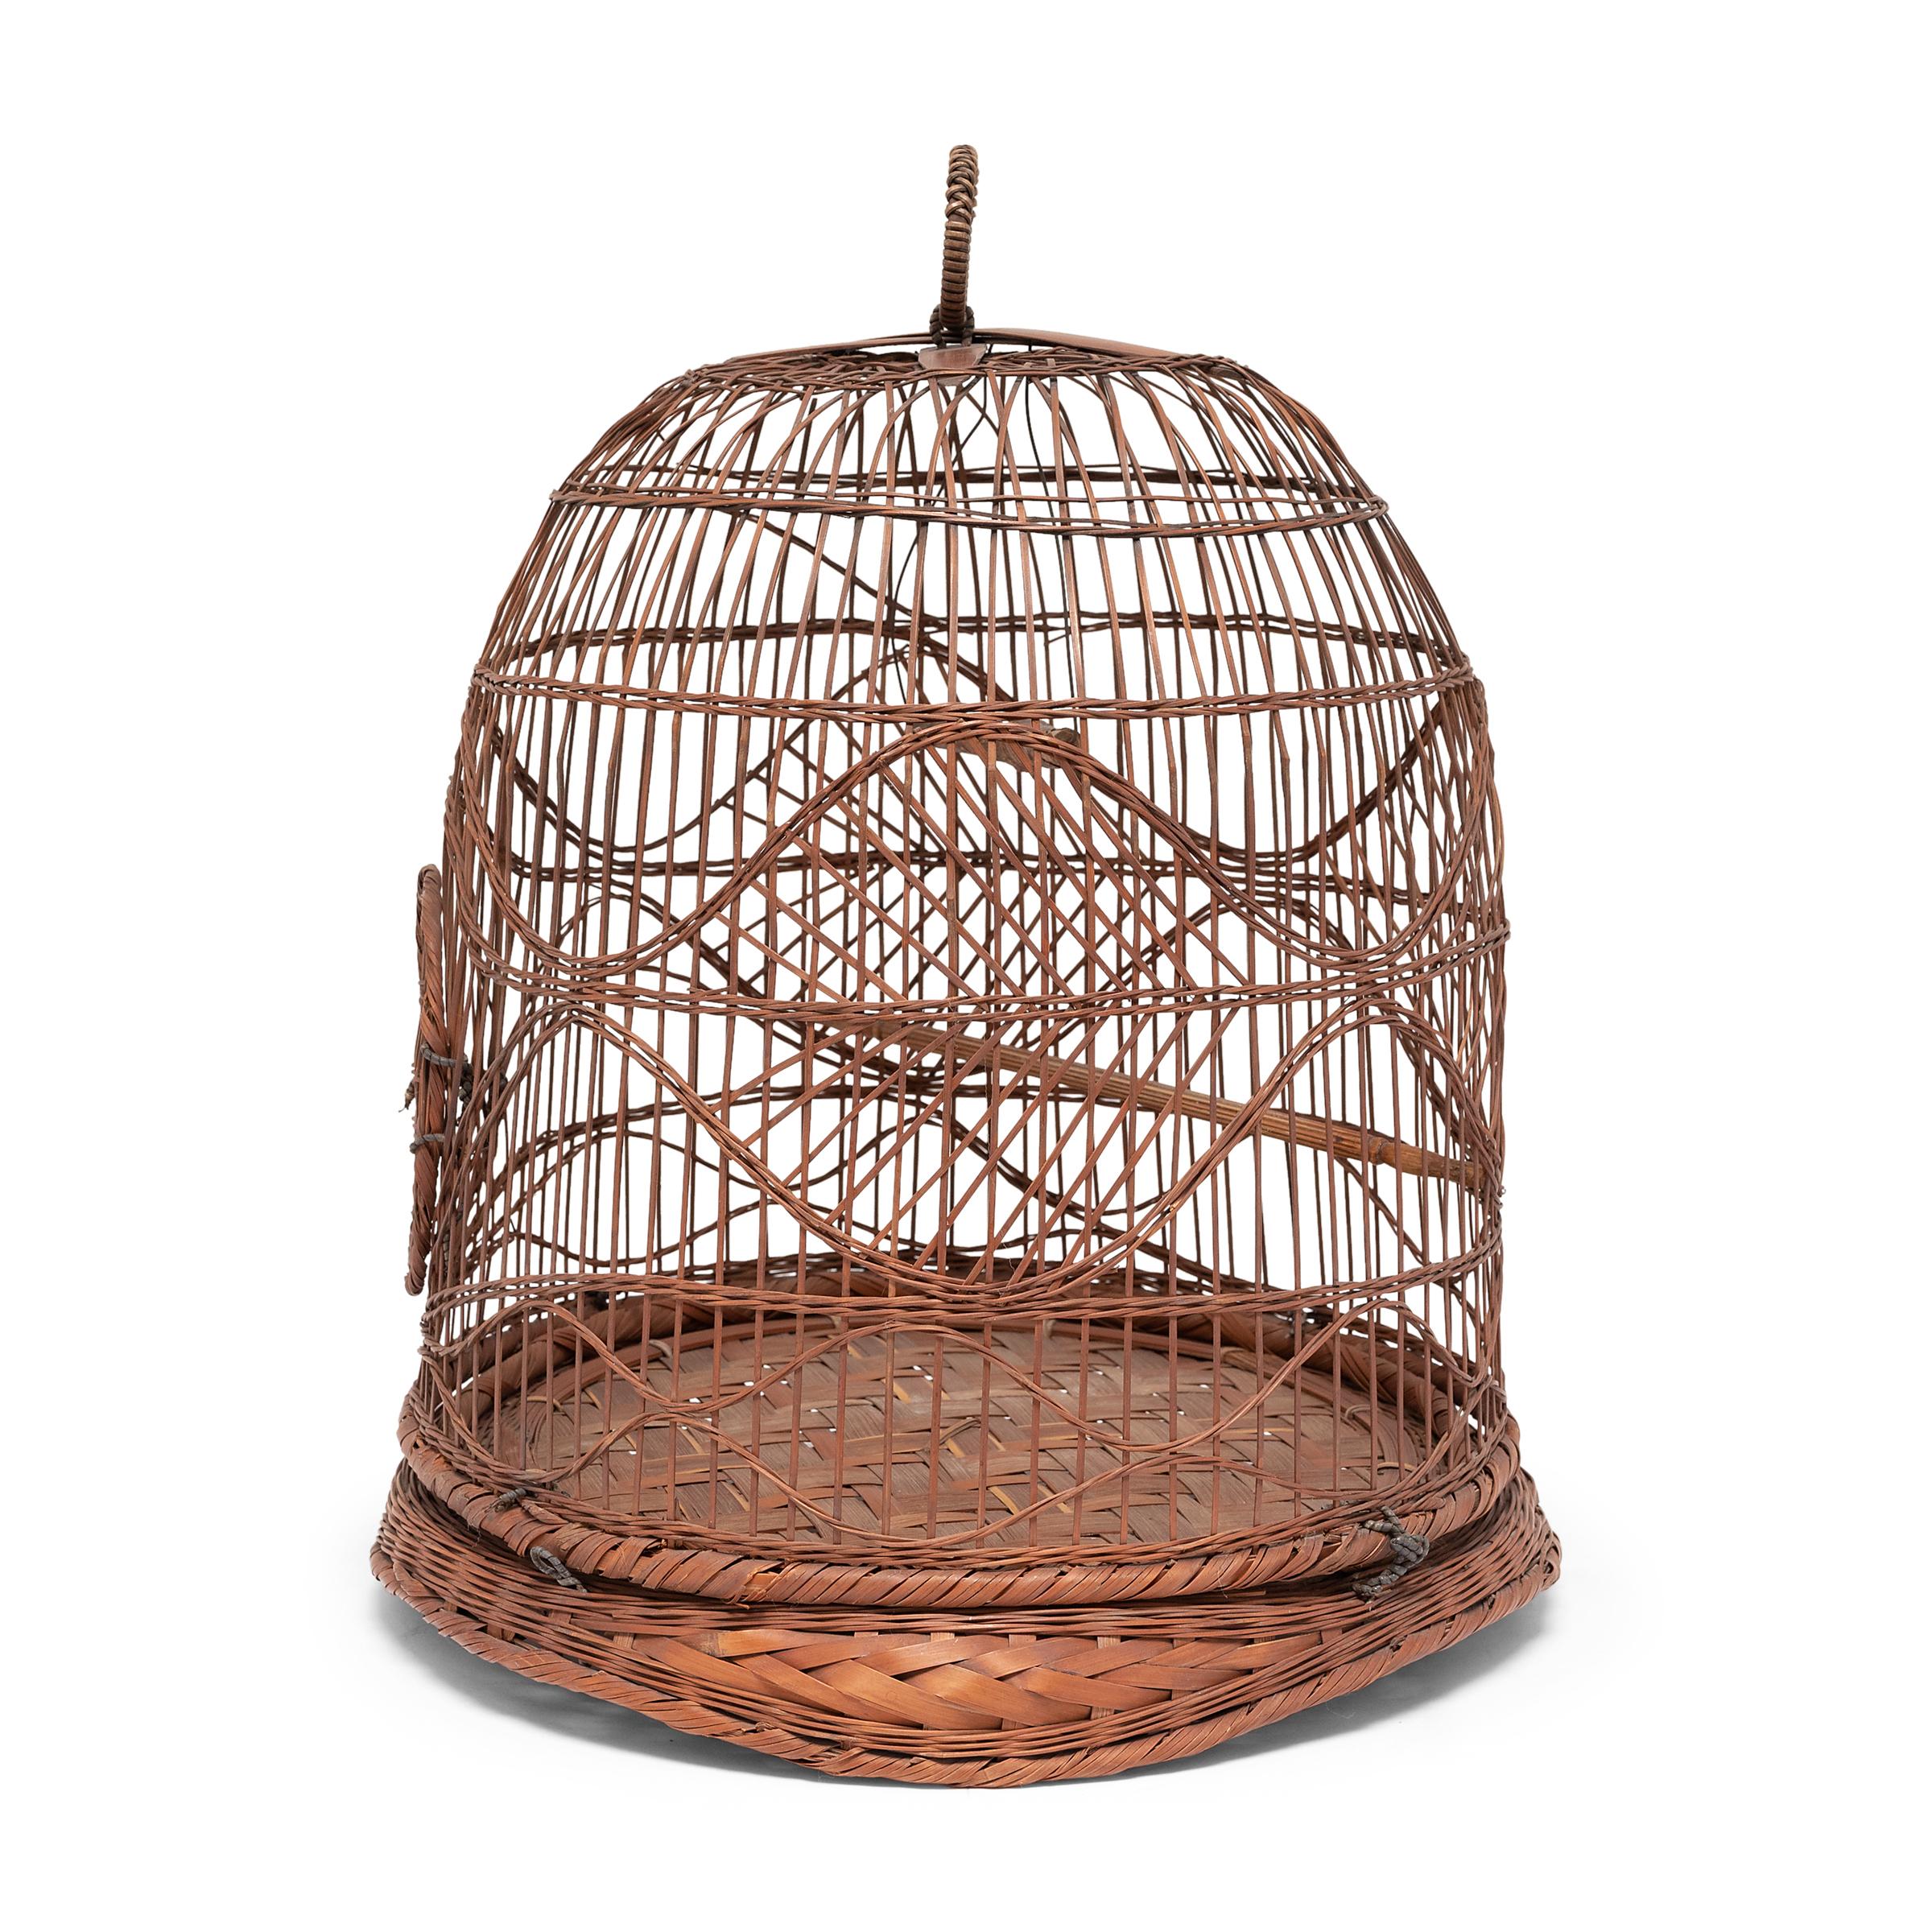 This elegant birdcage is beautifully woven of thin strips of bamboo in the spirit of fine decorative basketry. The horizontal weft wraps around the cage with graceful curves, mirrored by the curved tripod form of the woven base. The cage includes